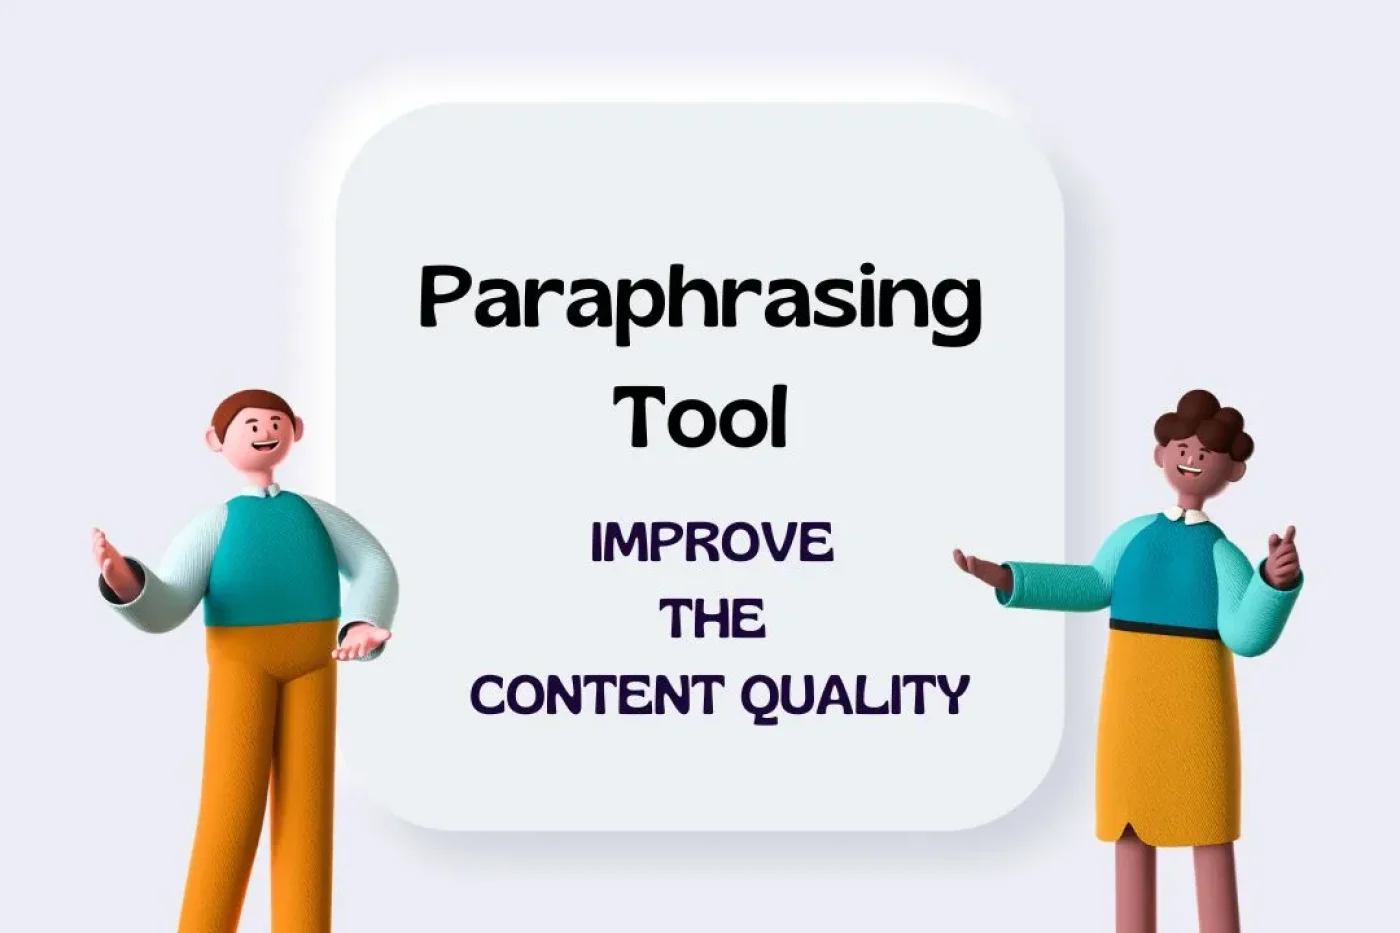 How to Use a Paraphrasing Tool to Improve Content Quality